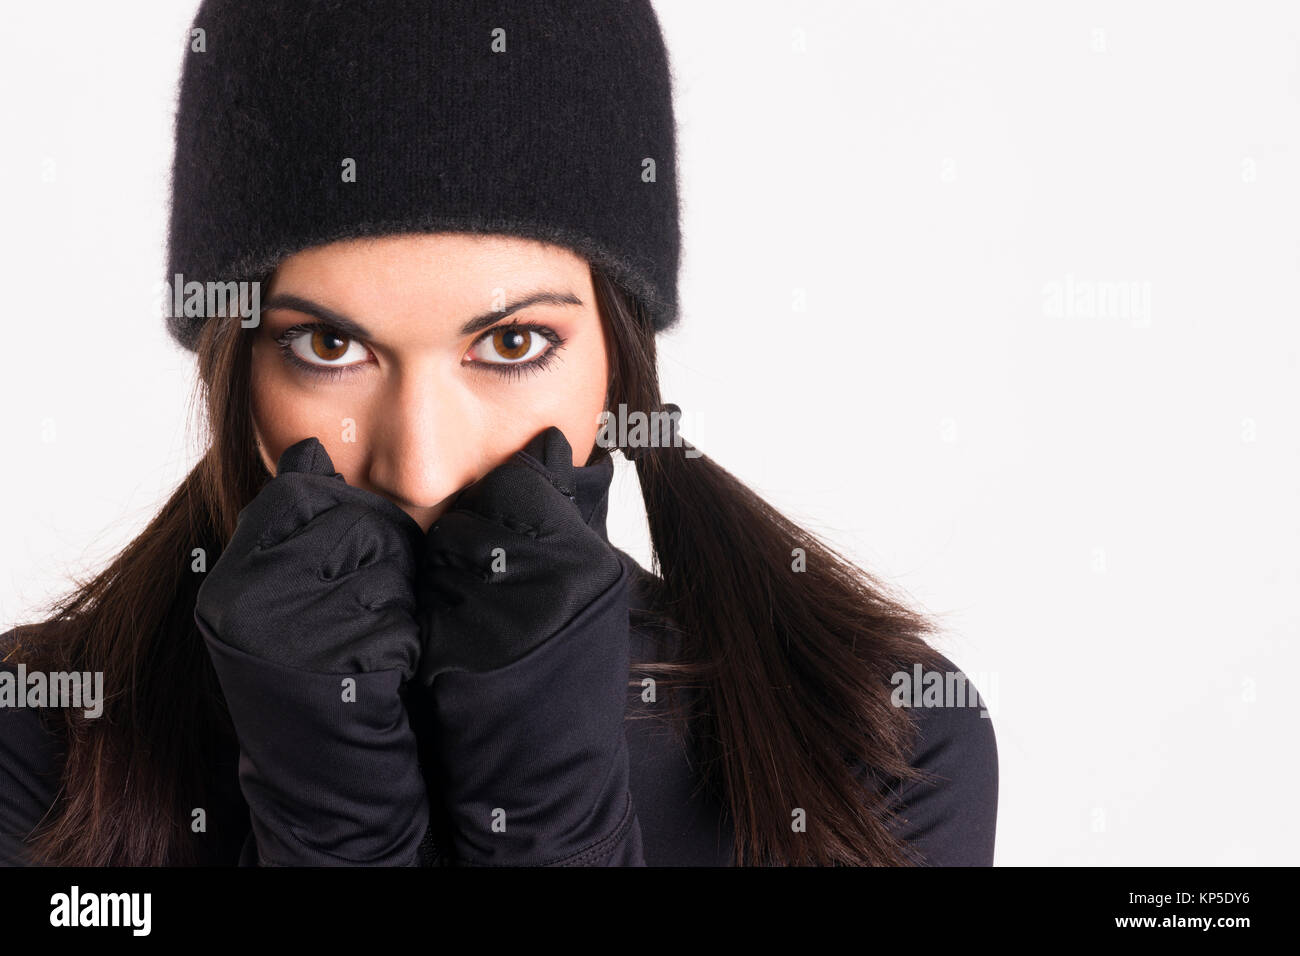 Pretty Woman Outlaw in Black Stealth Outfit Black Gloves Cap Stock Photo